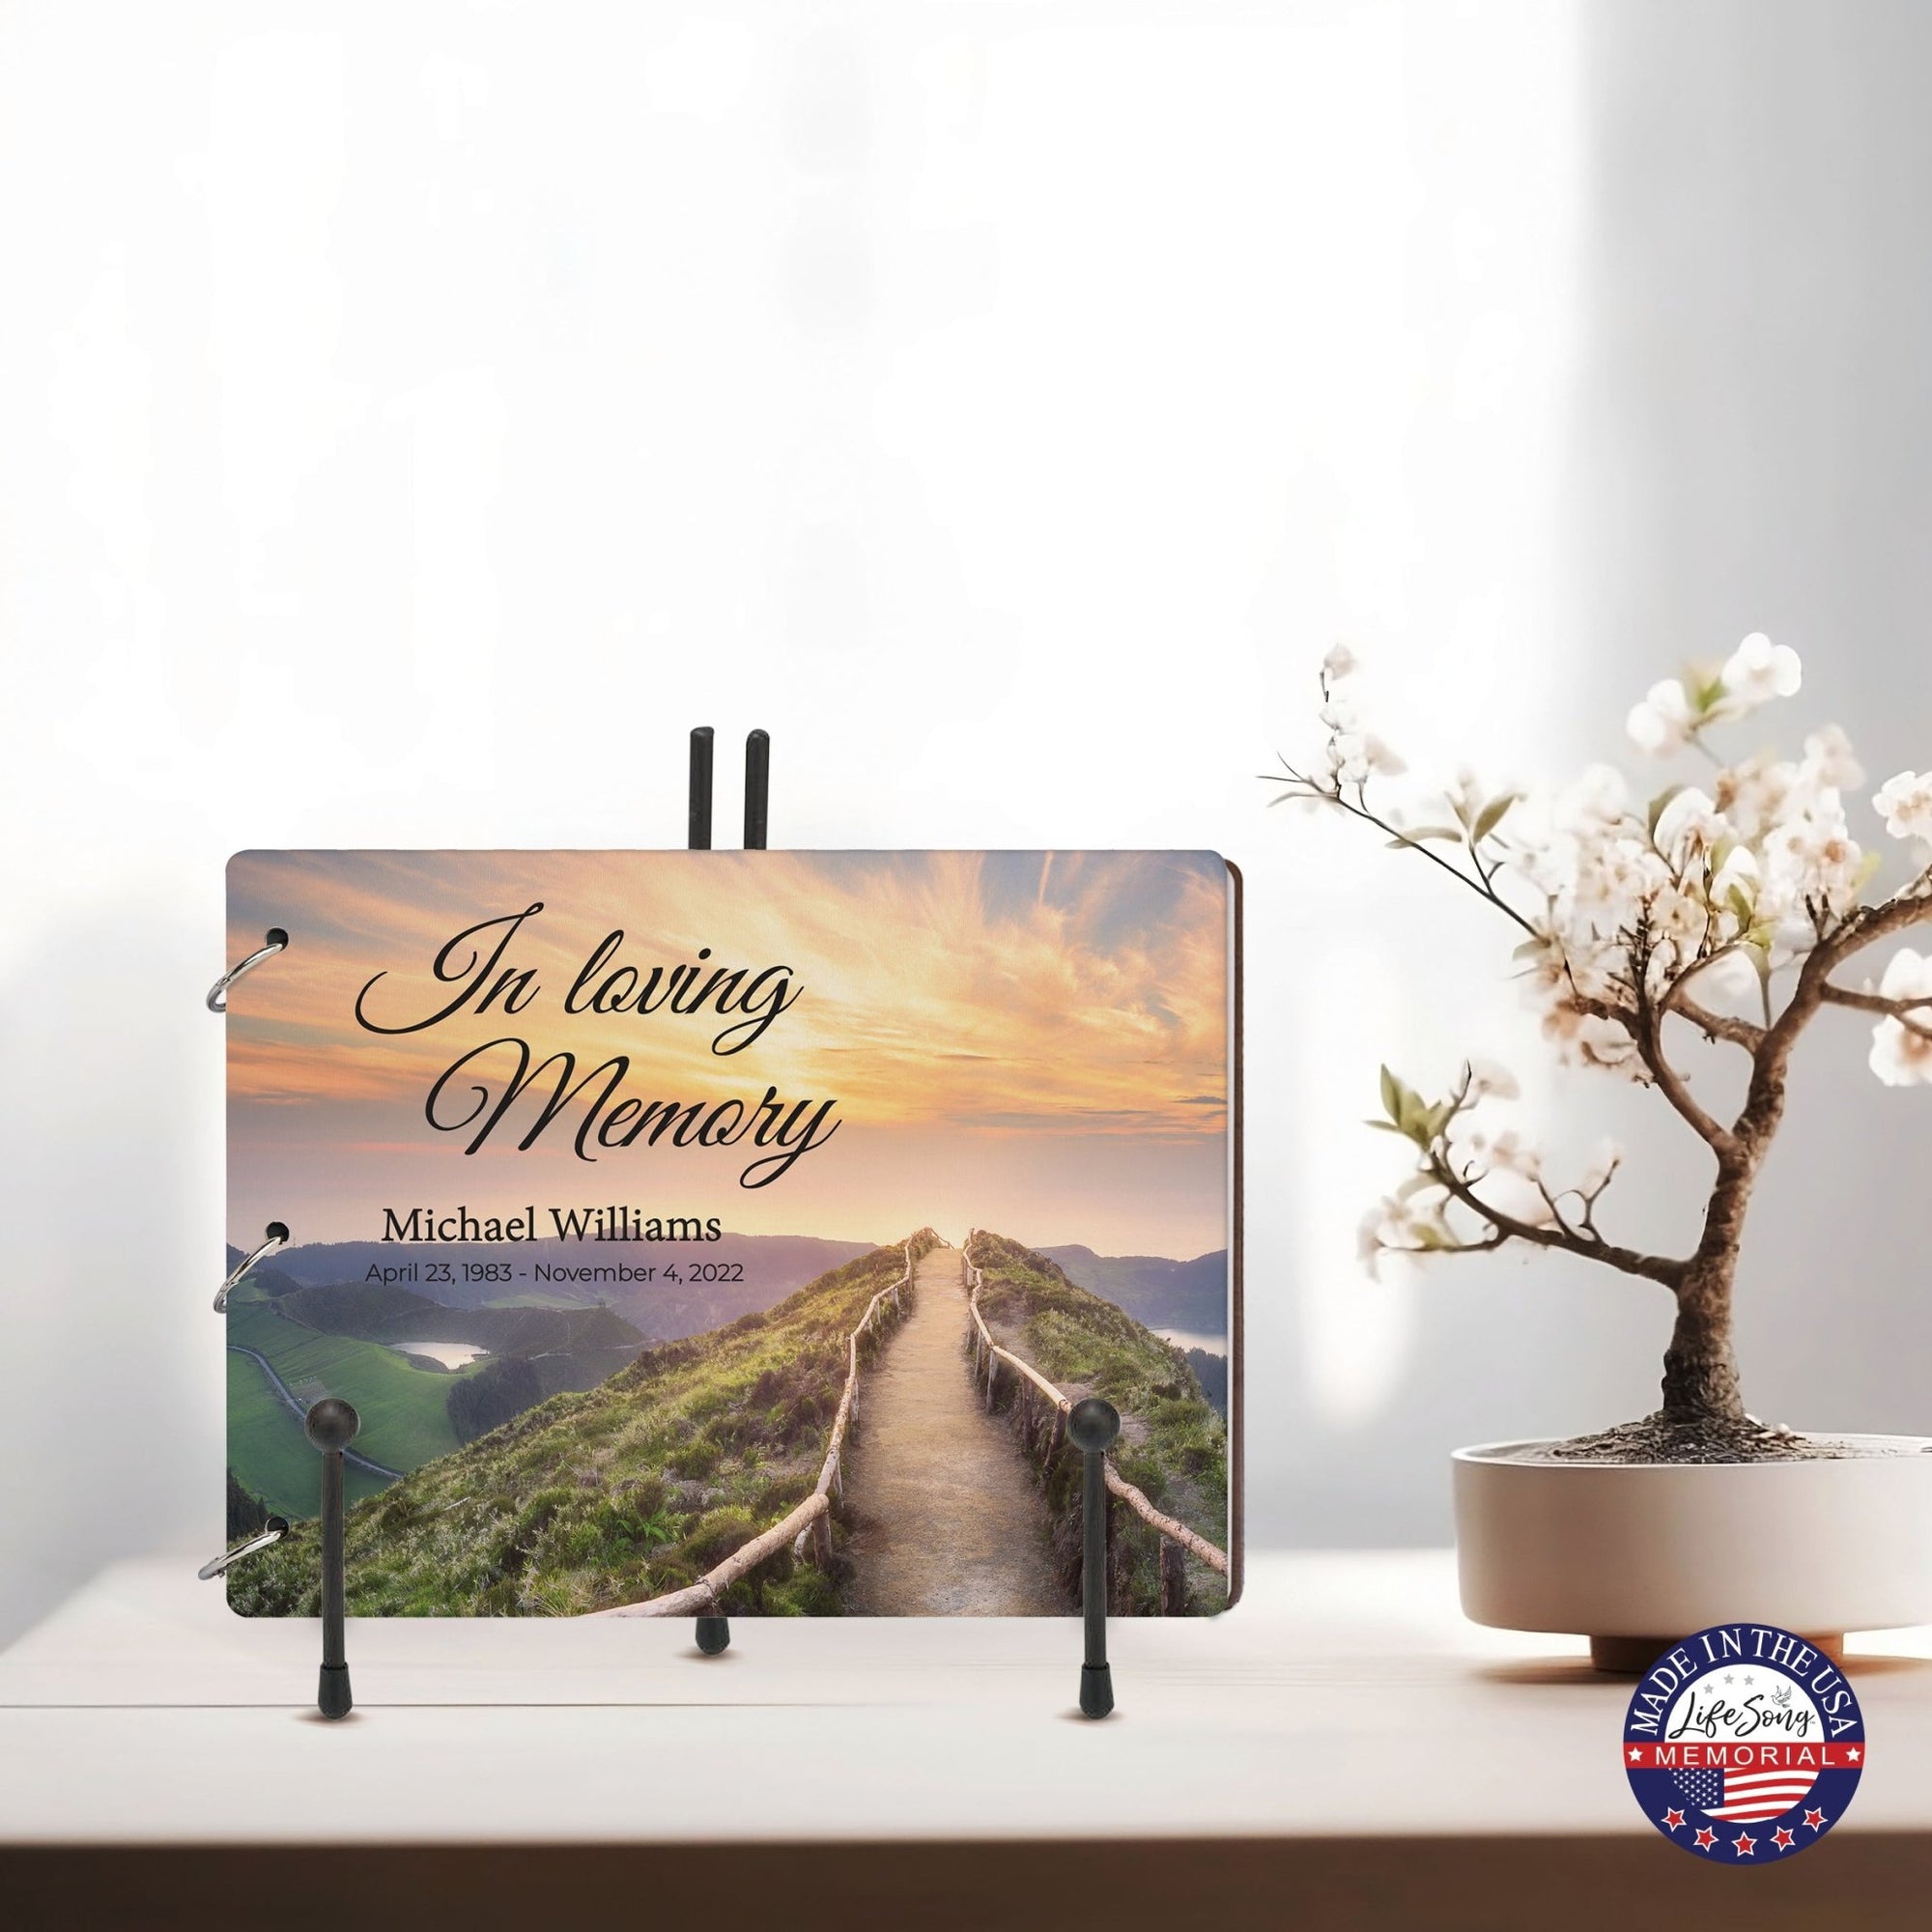 Personalized Celebration Of Life Funeral Guest Books For Memorial Services Registry With Wooden Cover - In Loving Memory - LifeSong Milestones